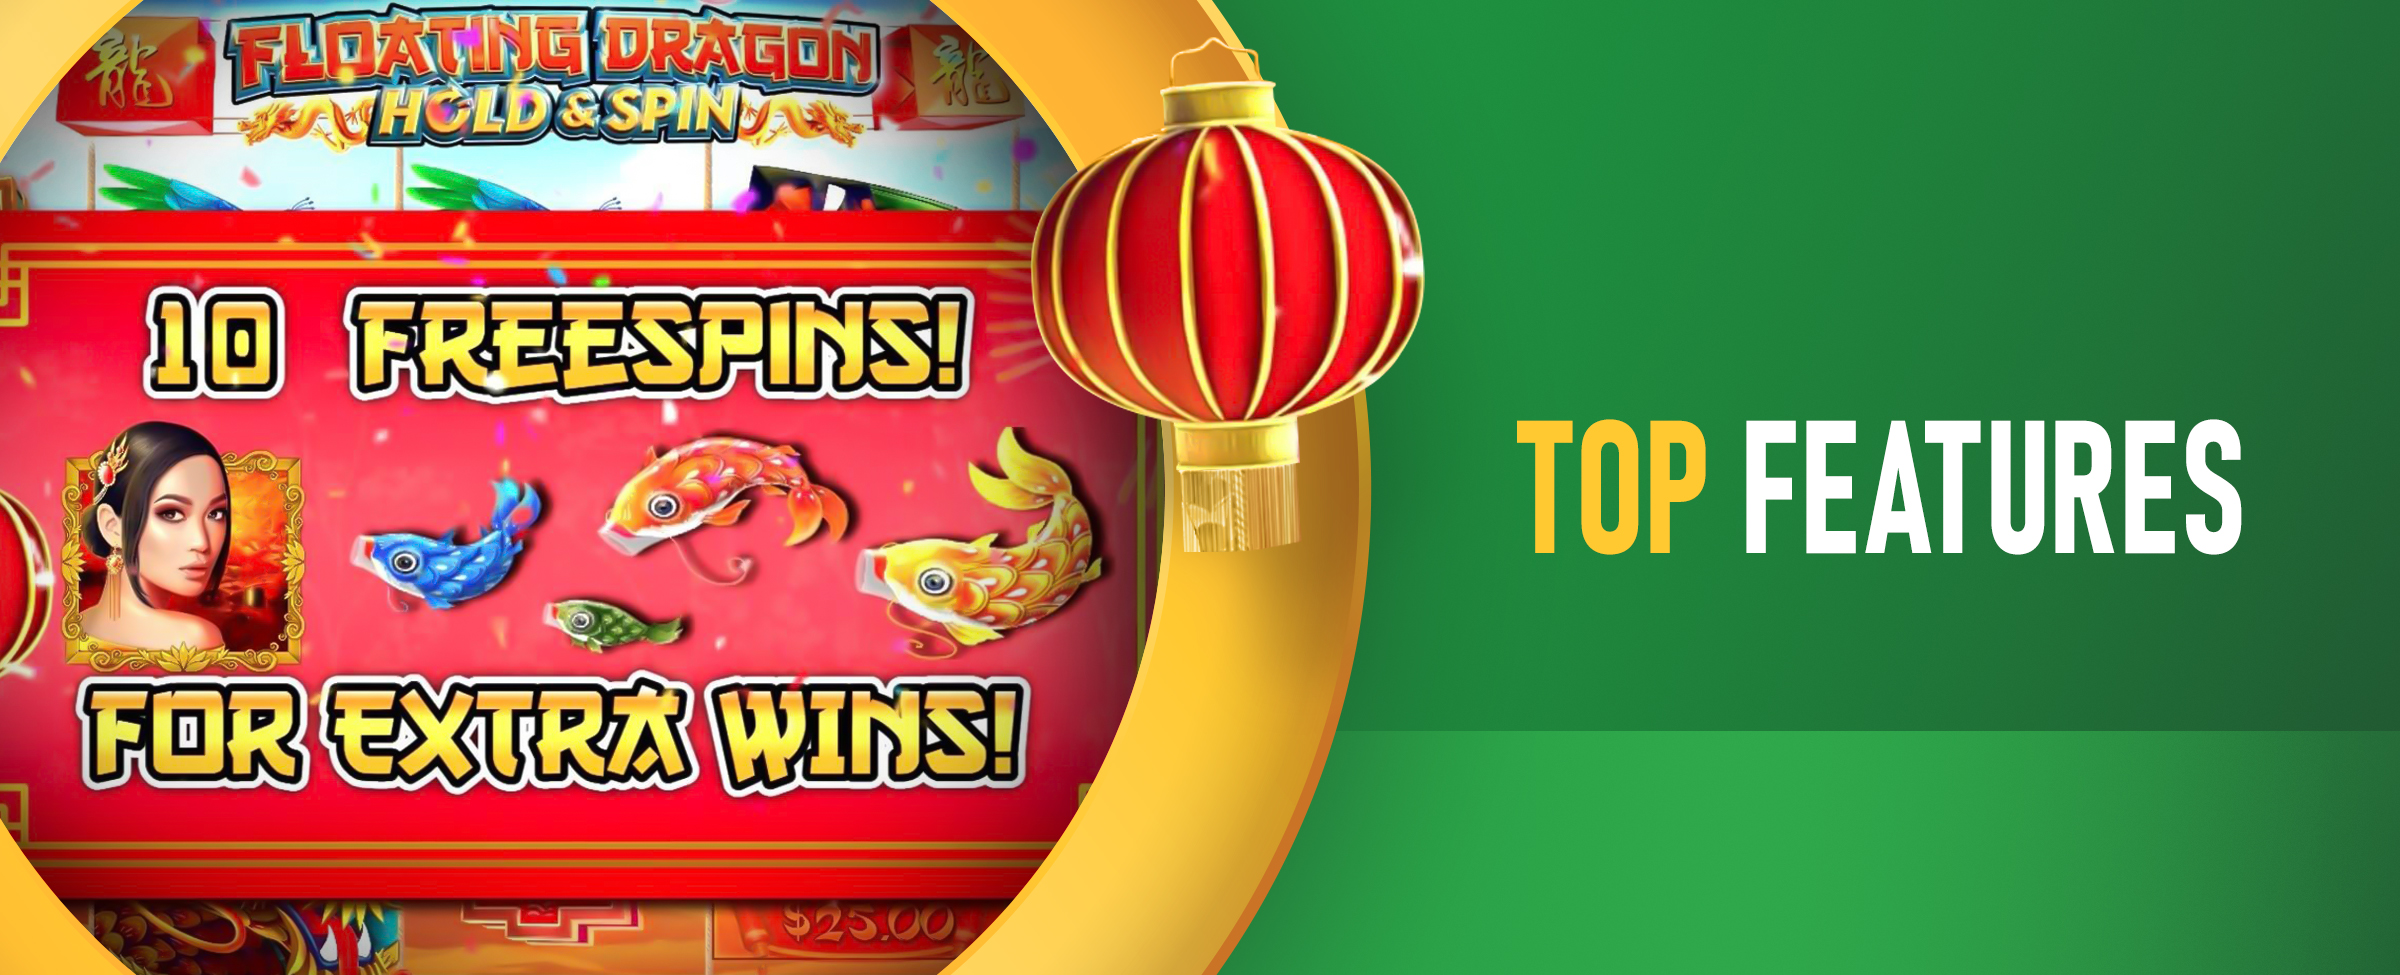 A screenshot from the Joe Fortune online pokie, Floating Dragon shows 10 free spins being awarded. Beside it reads ‘Top Features’. On a vibrant green background.